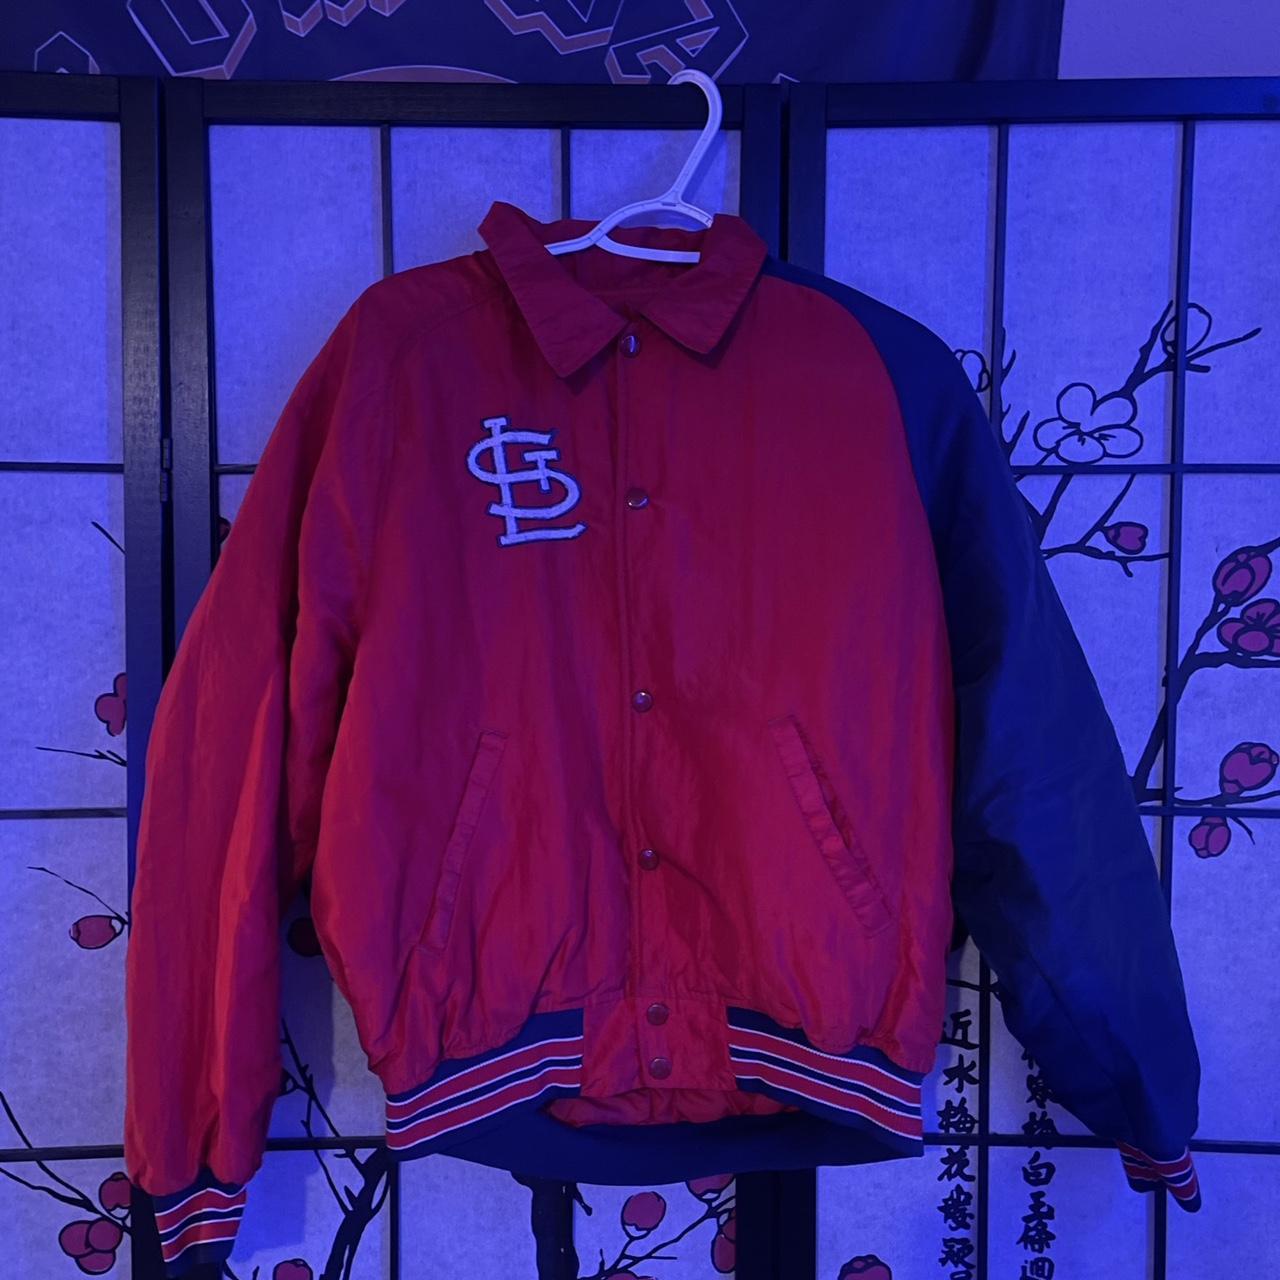 Vintage St. Louis Cardinals jacket in red. From the - Depop